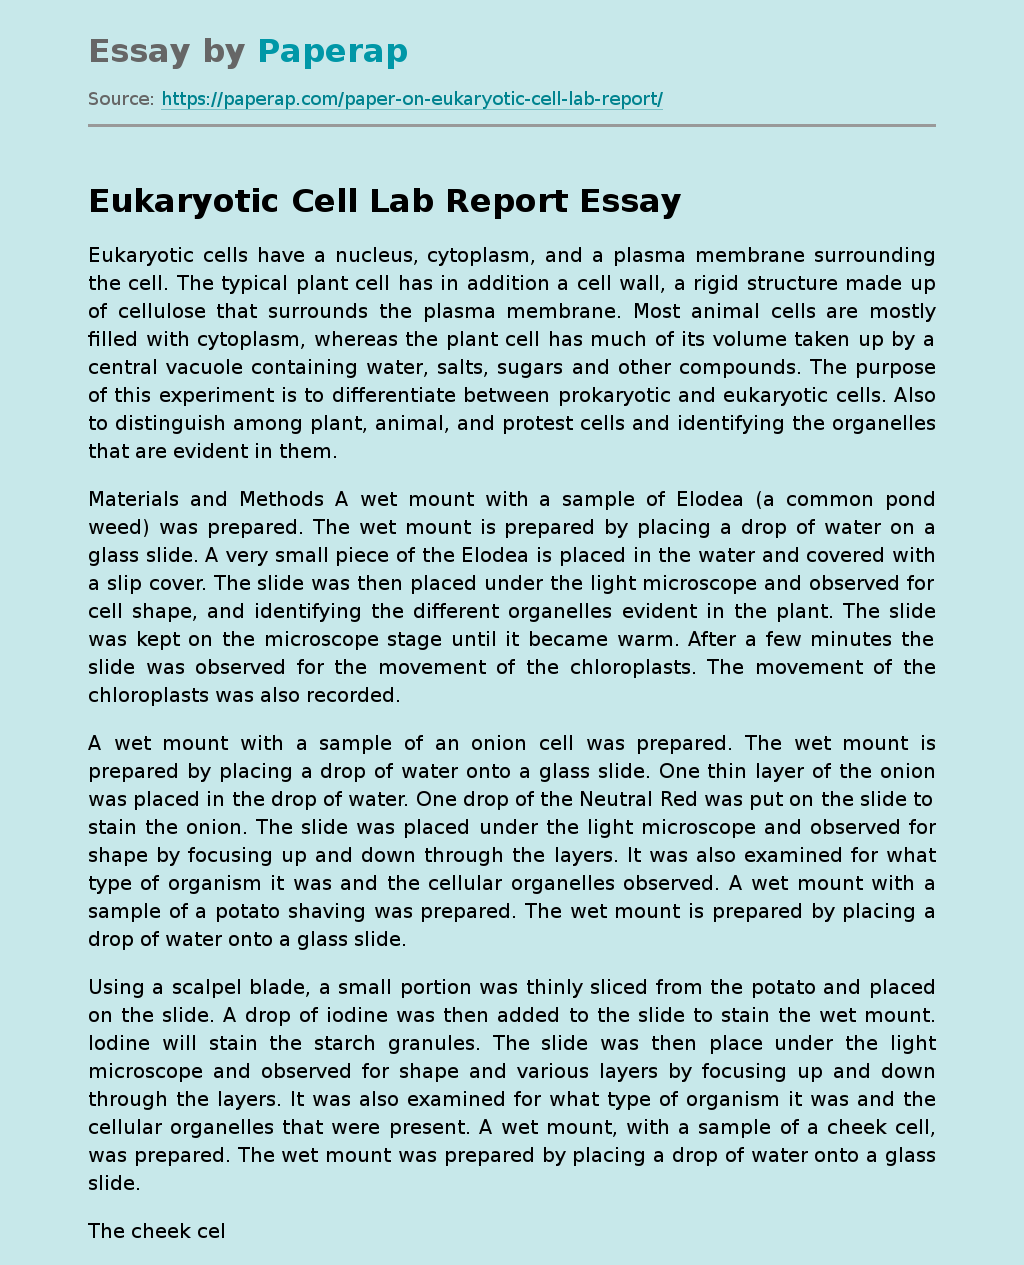 Eukaryotic Cell Lab Report